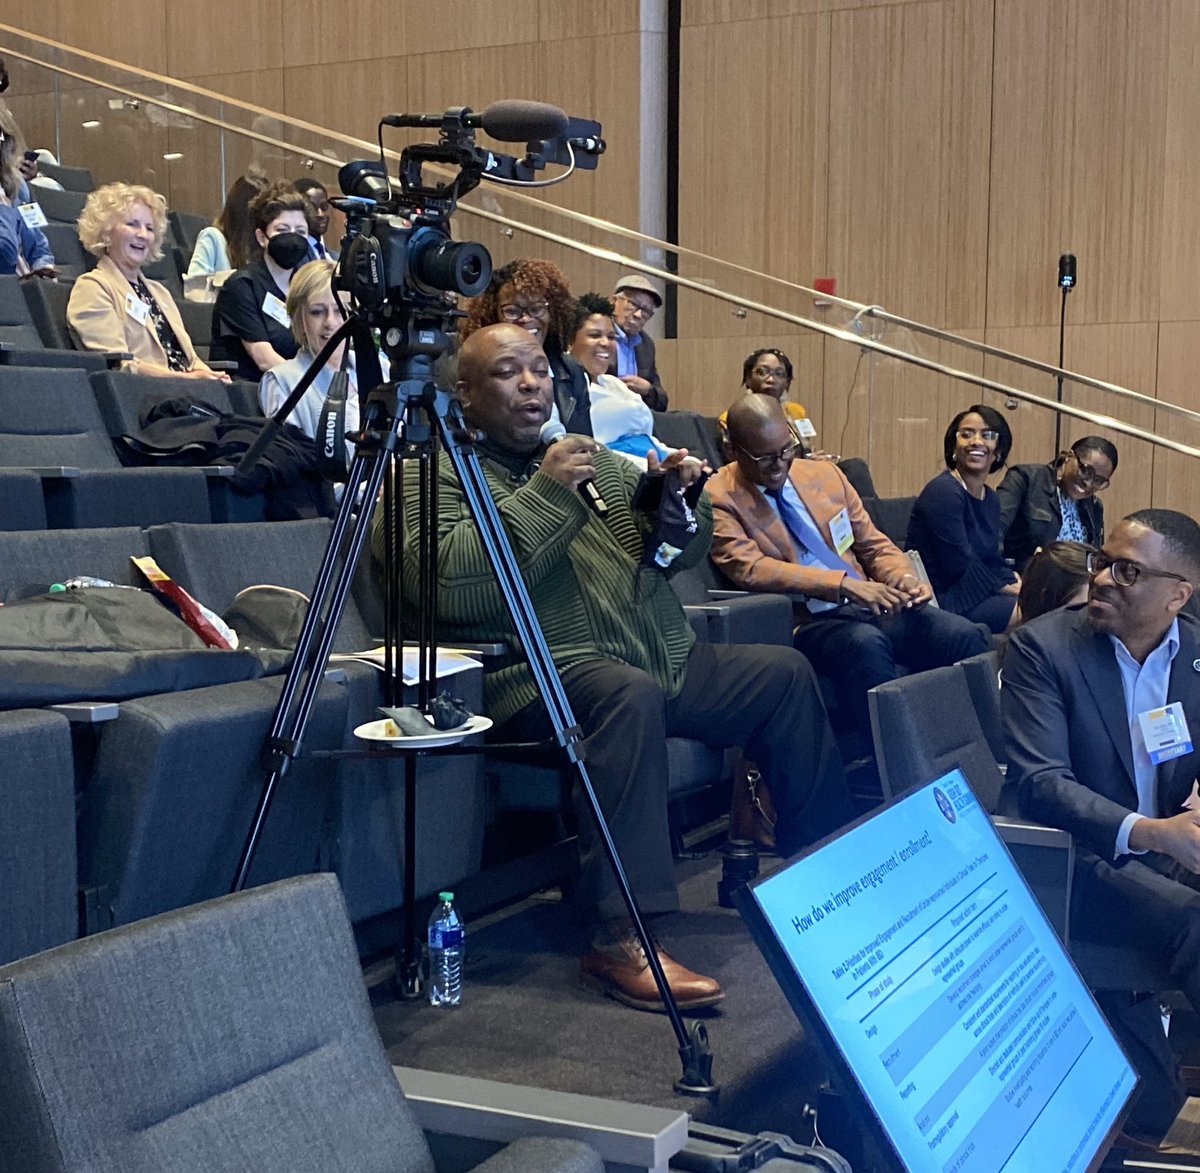 Listen….there is NO conference like #ABGHSummit23. Even the camera man is on the mic asking questions! 🙌🏾